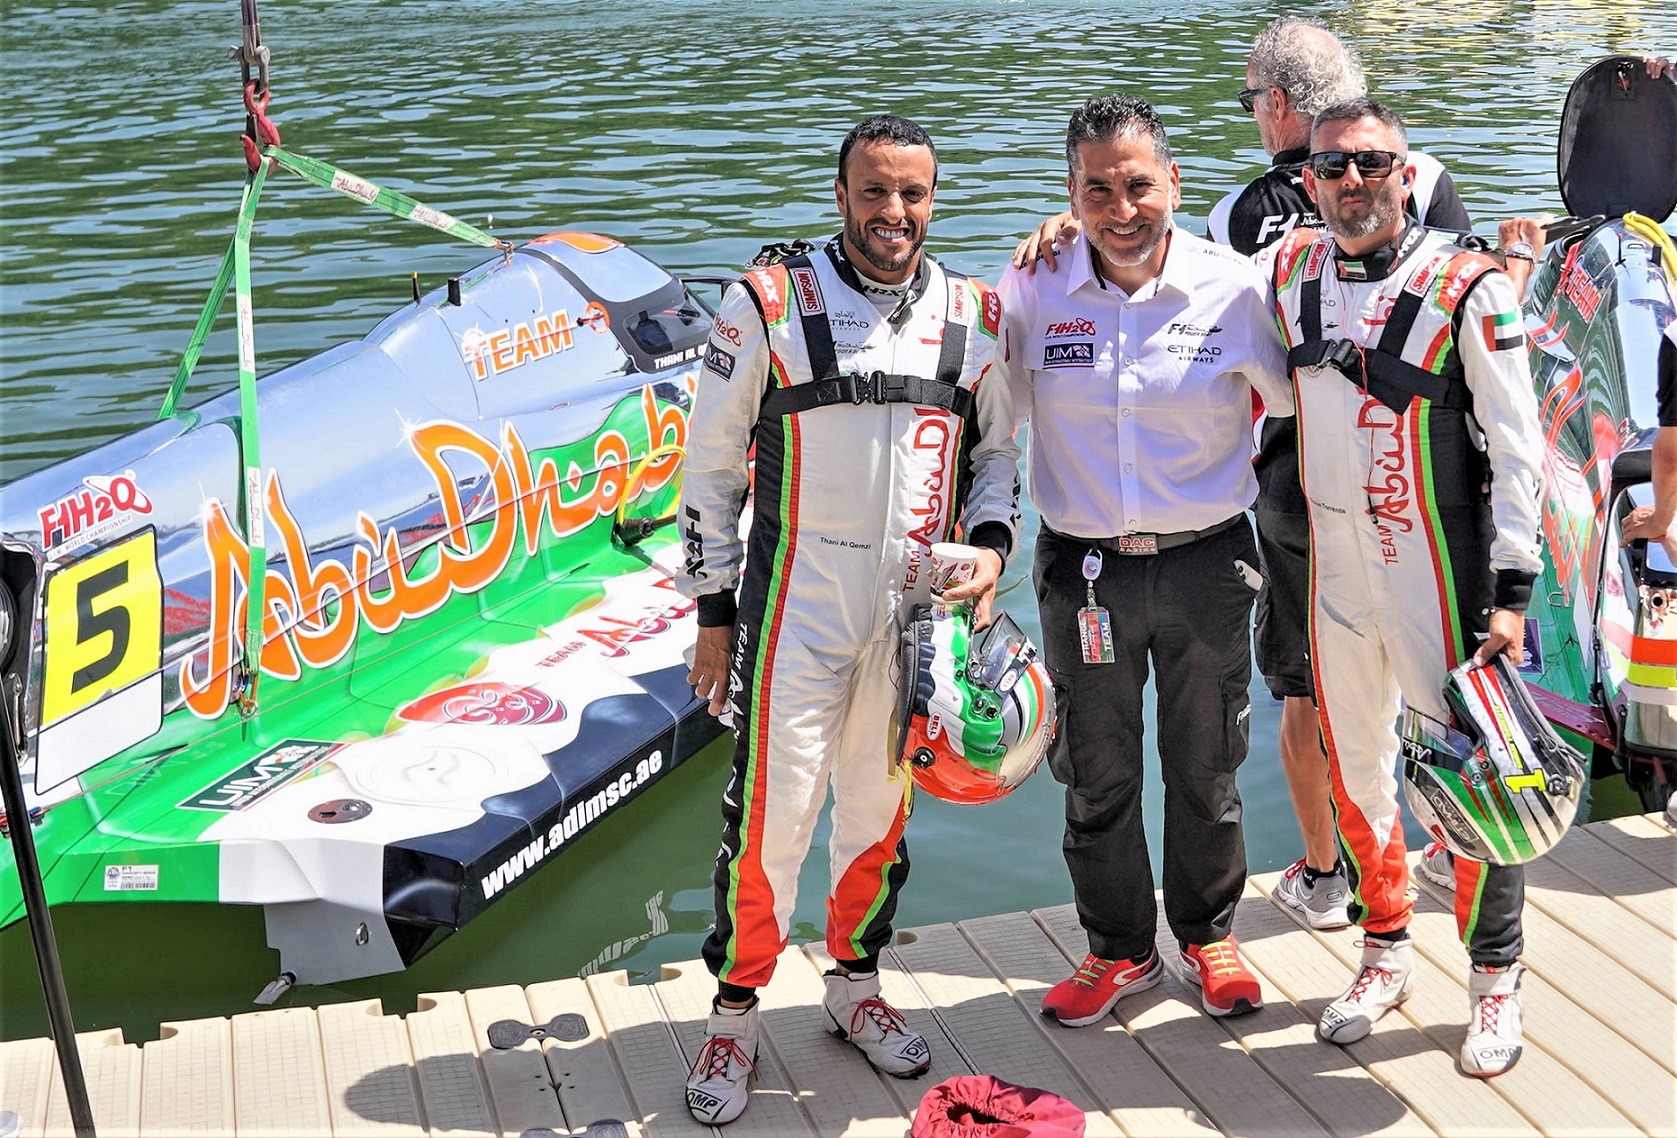 Team Abu Dhabi ready for battle as world championship breaks new ground in Indonesia     Torrente relishing challenge as Victory return creates  three-way UAE team rivalry